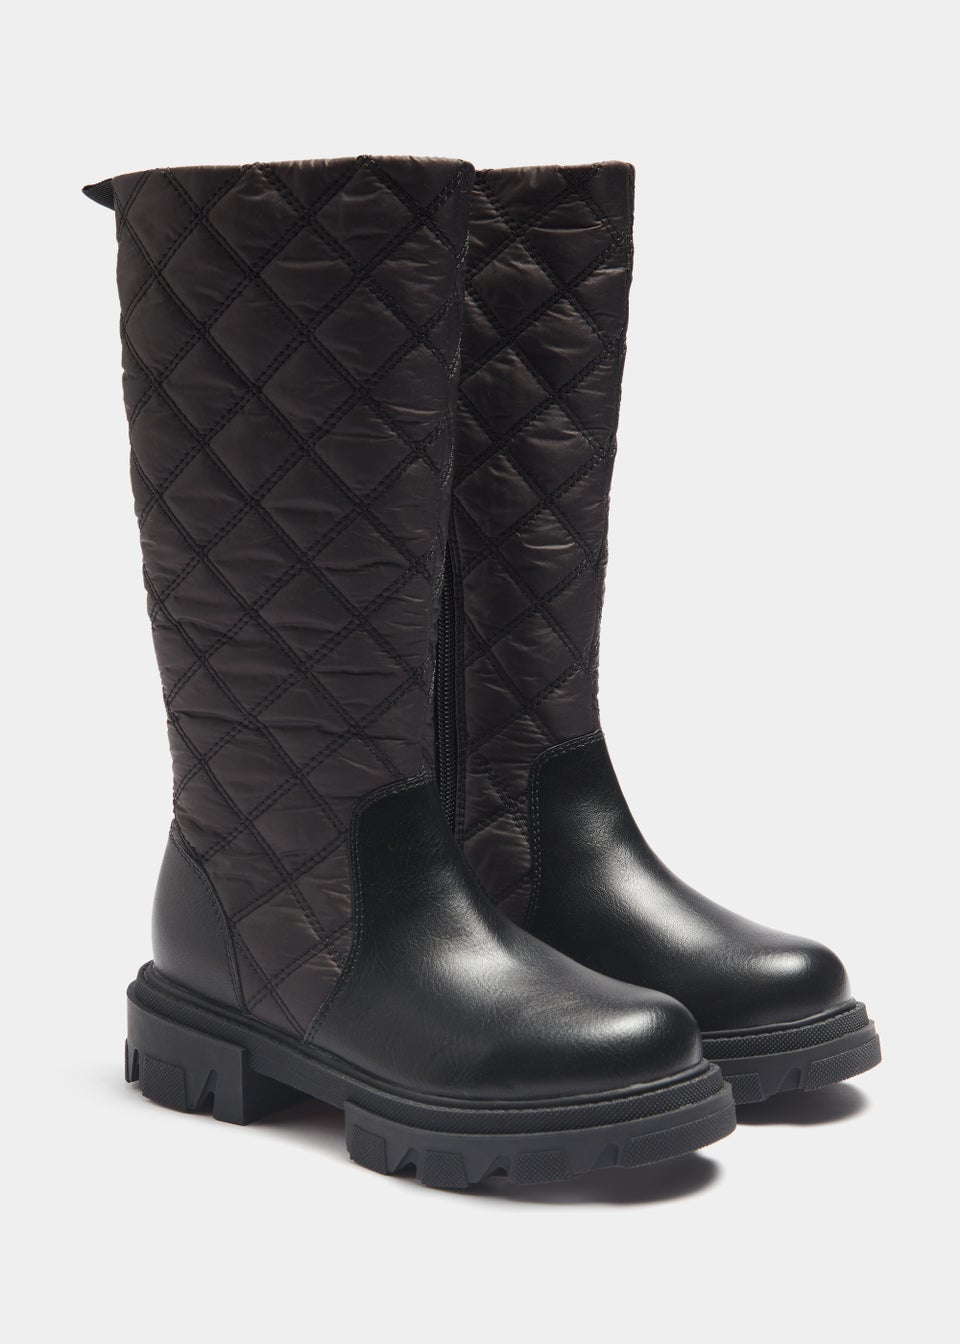 Girls Black Quilted Knee High Boots (Younger 10-Older 5)